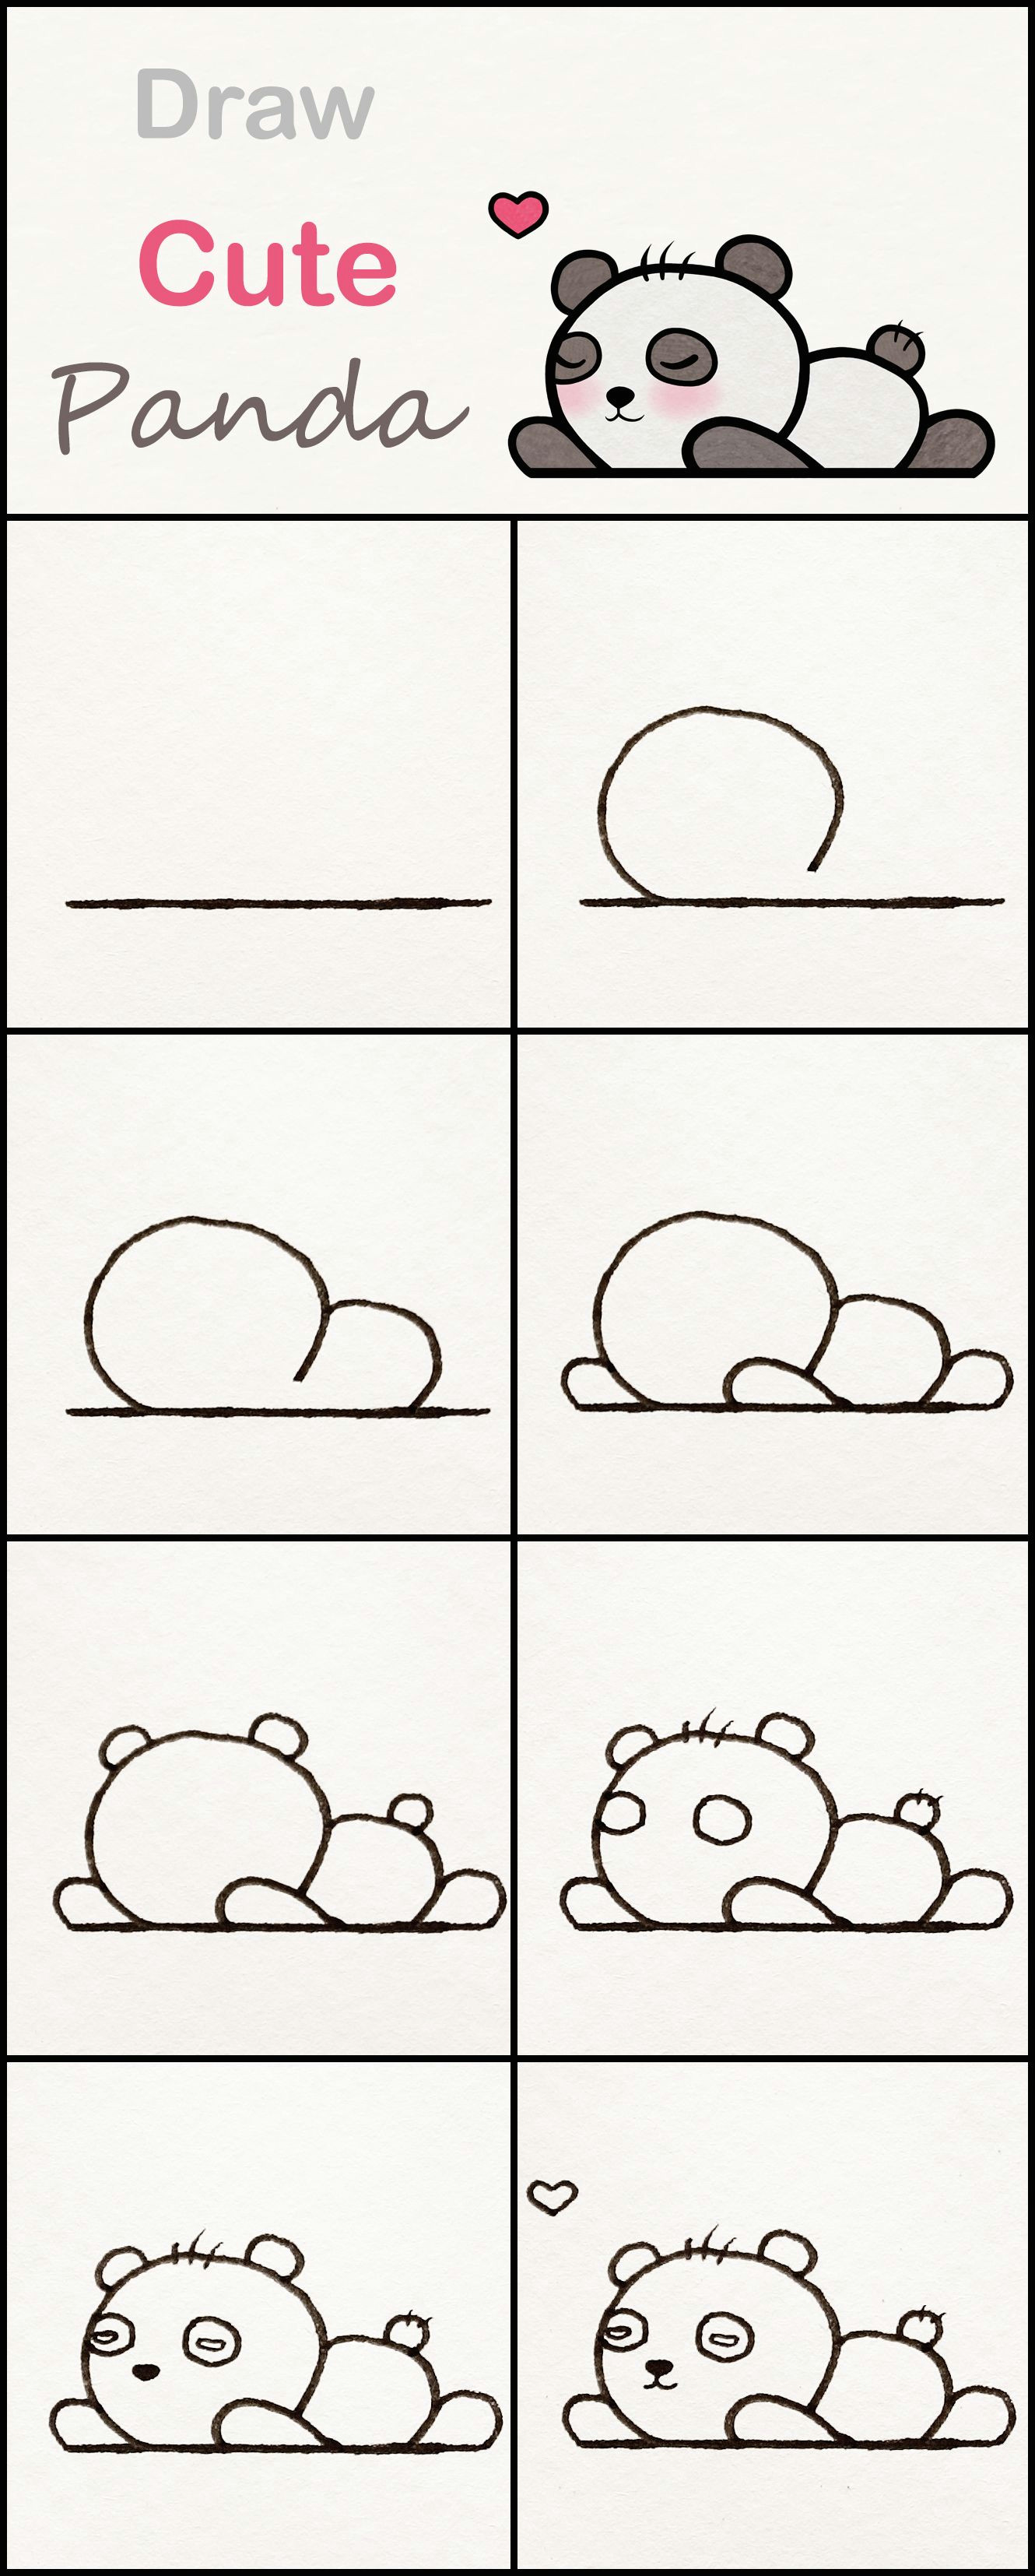 Cute Unicorn Drawing Step by Step Learn How to Draw A Cute Baby Panda Step by Step A Very Simple